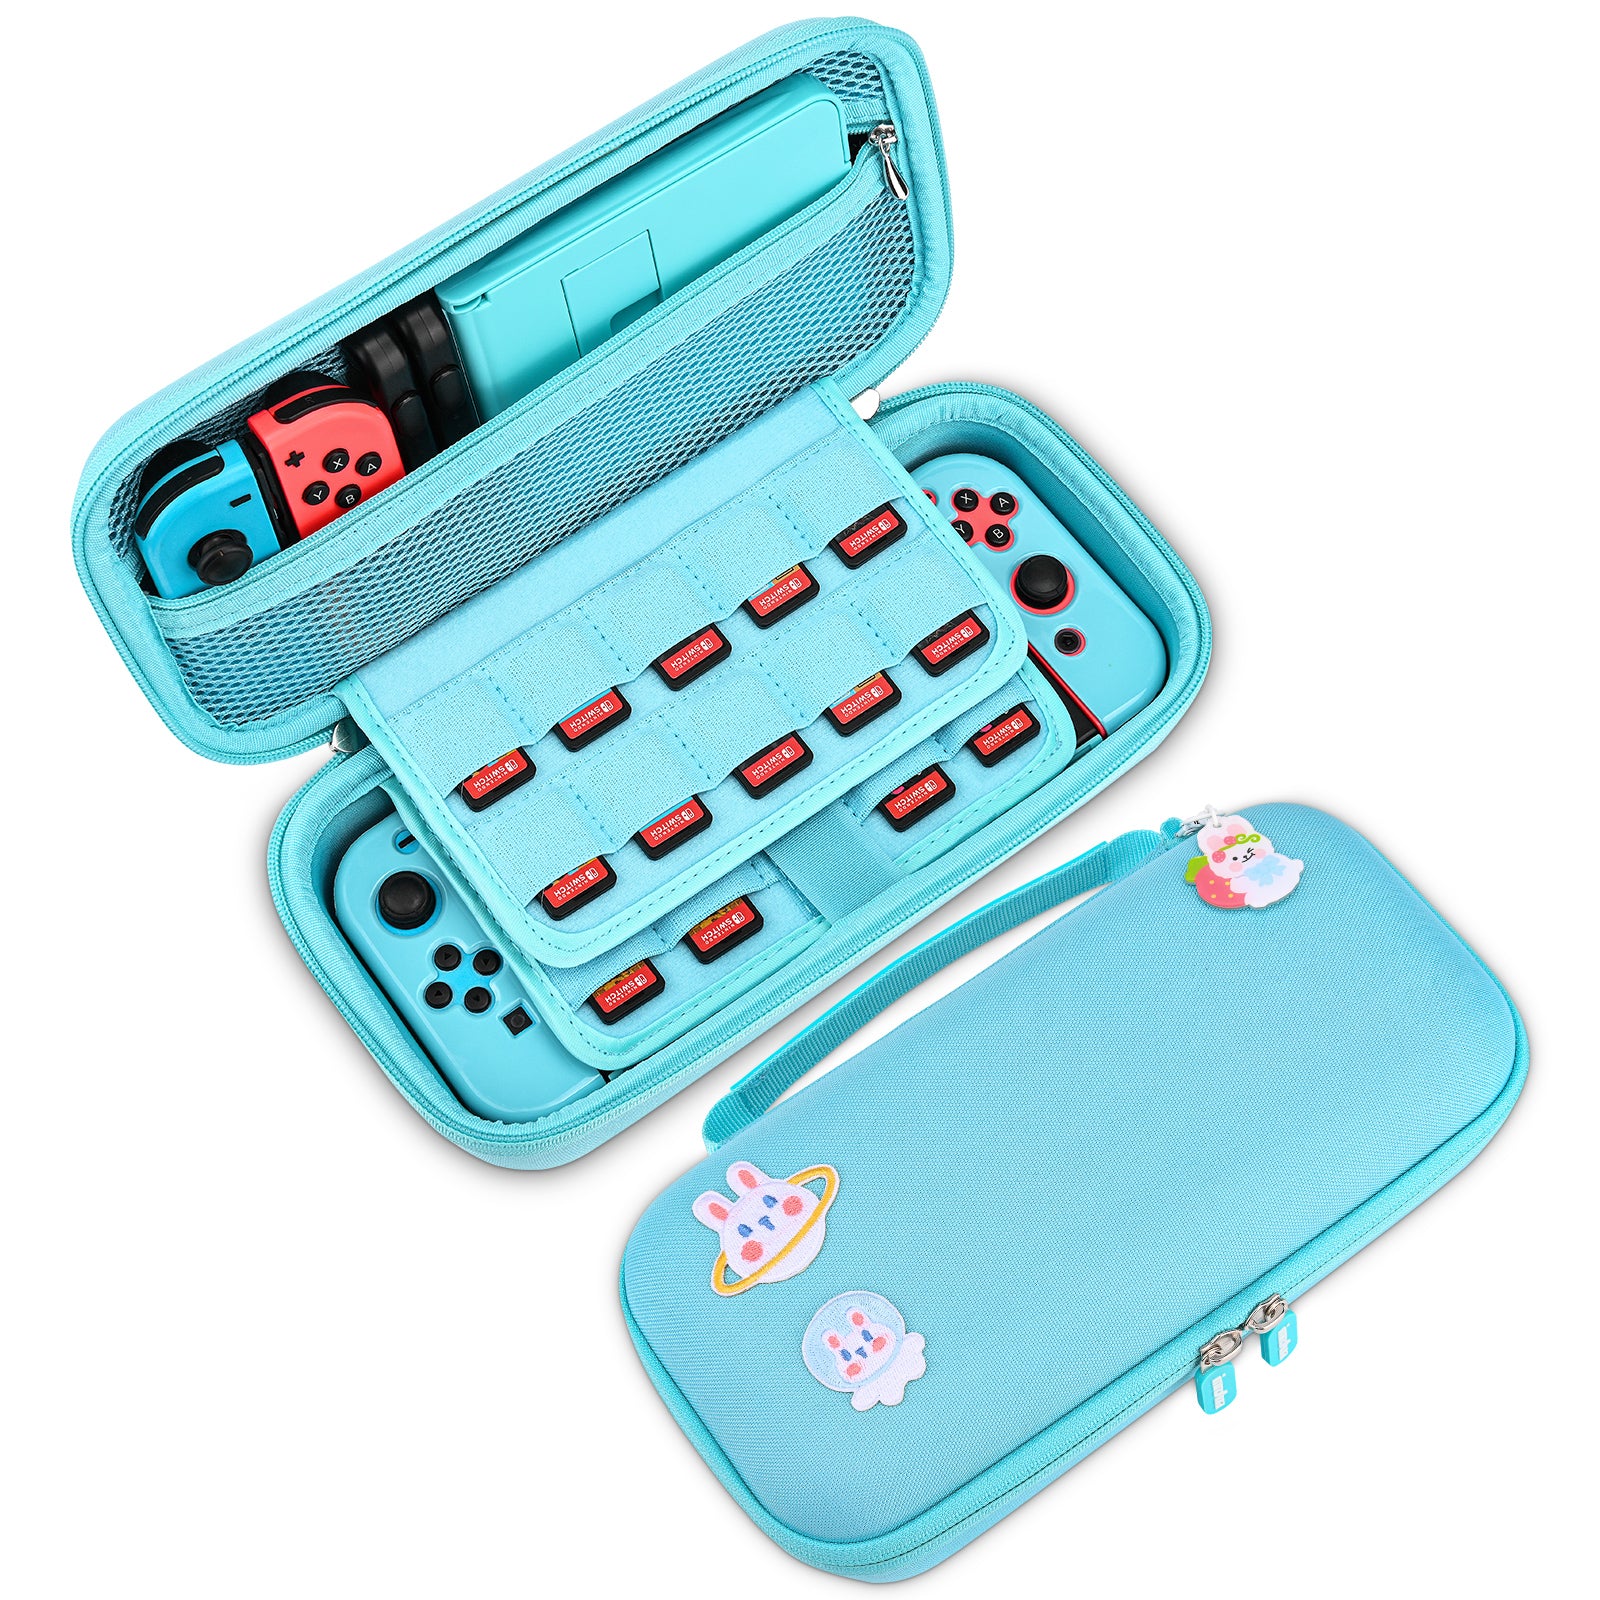 innoAura Nintendo Switch Carrying Case, Hard Case Gifts